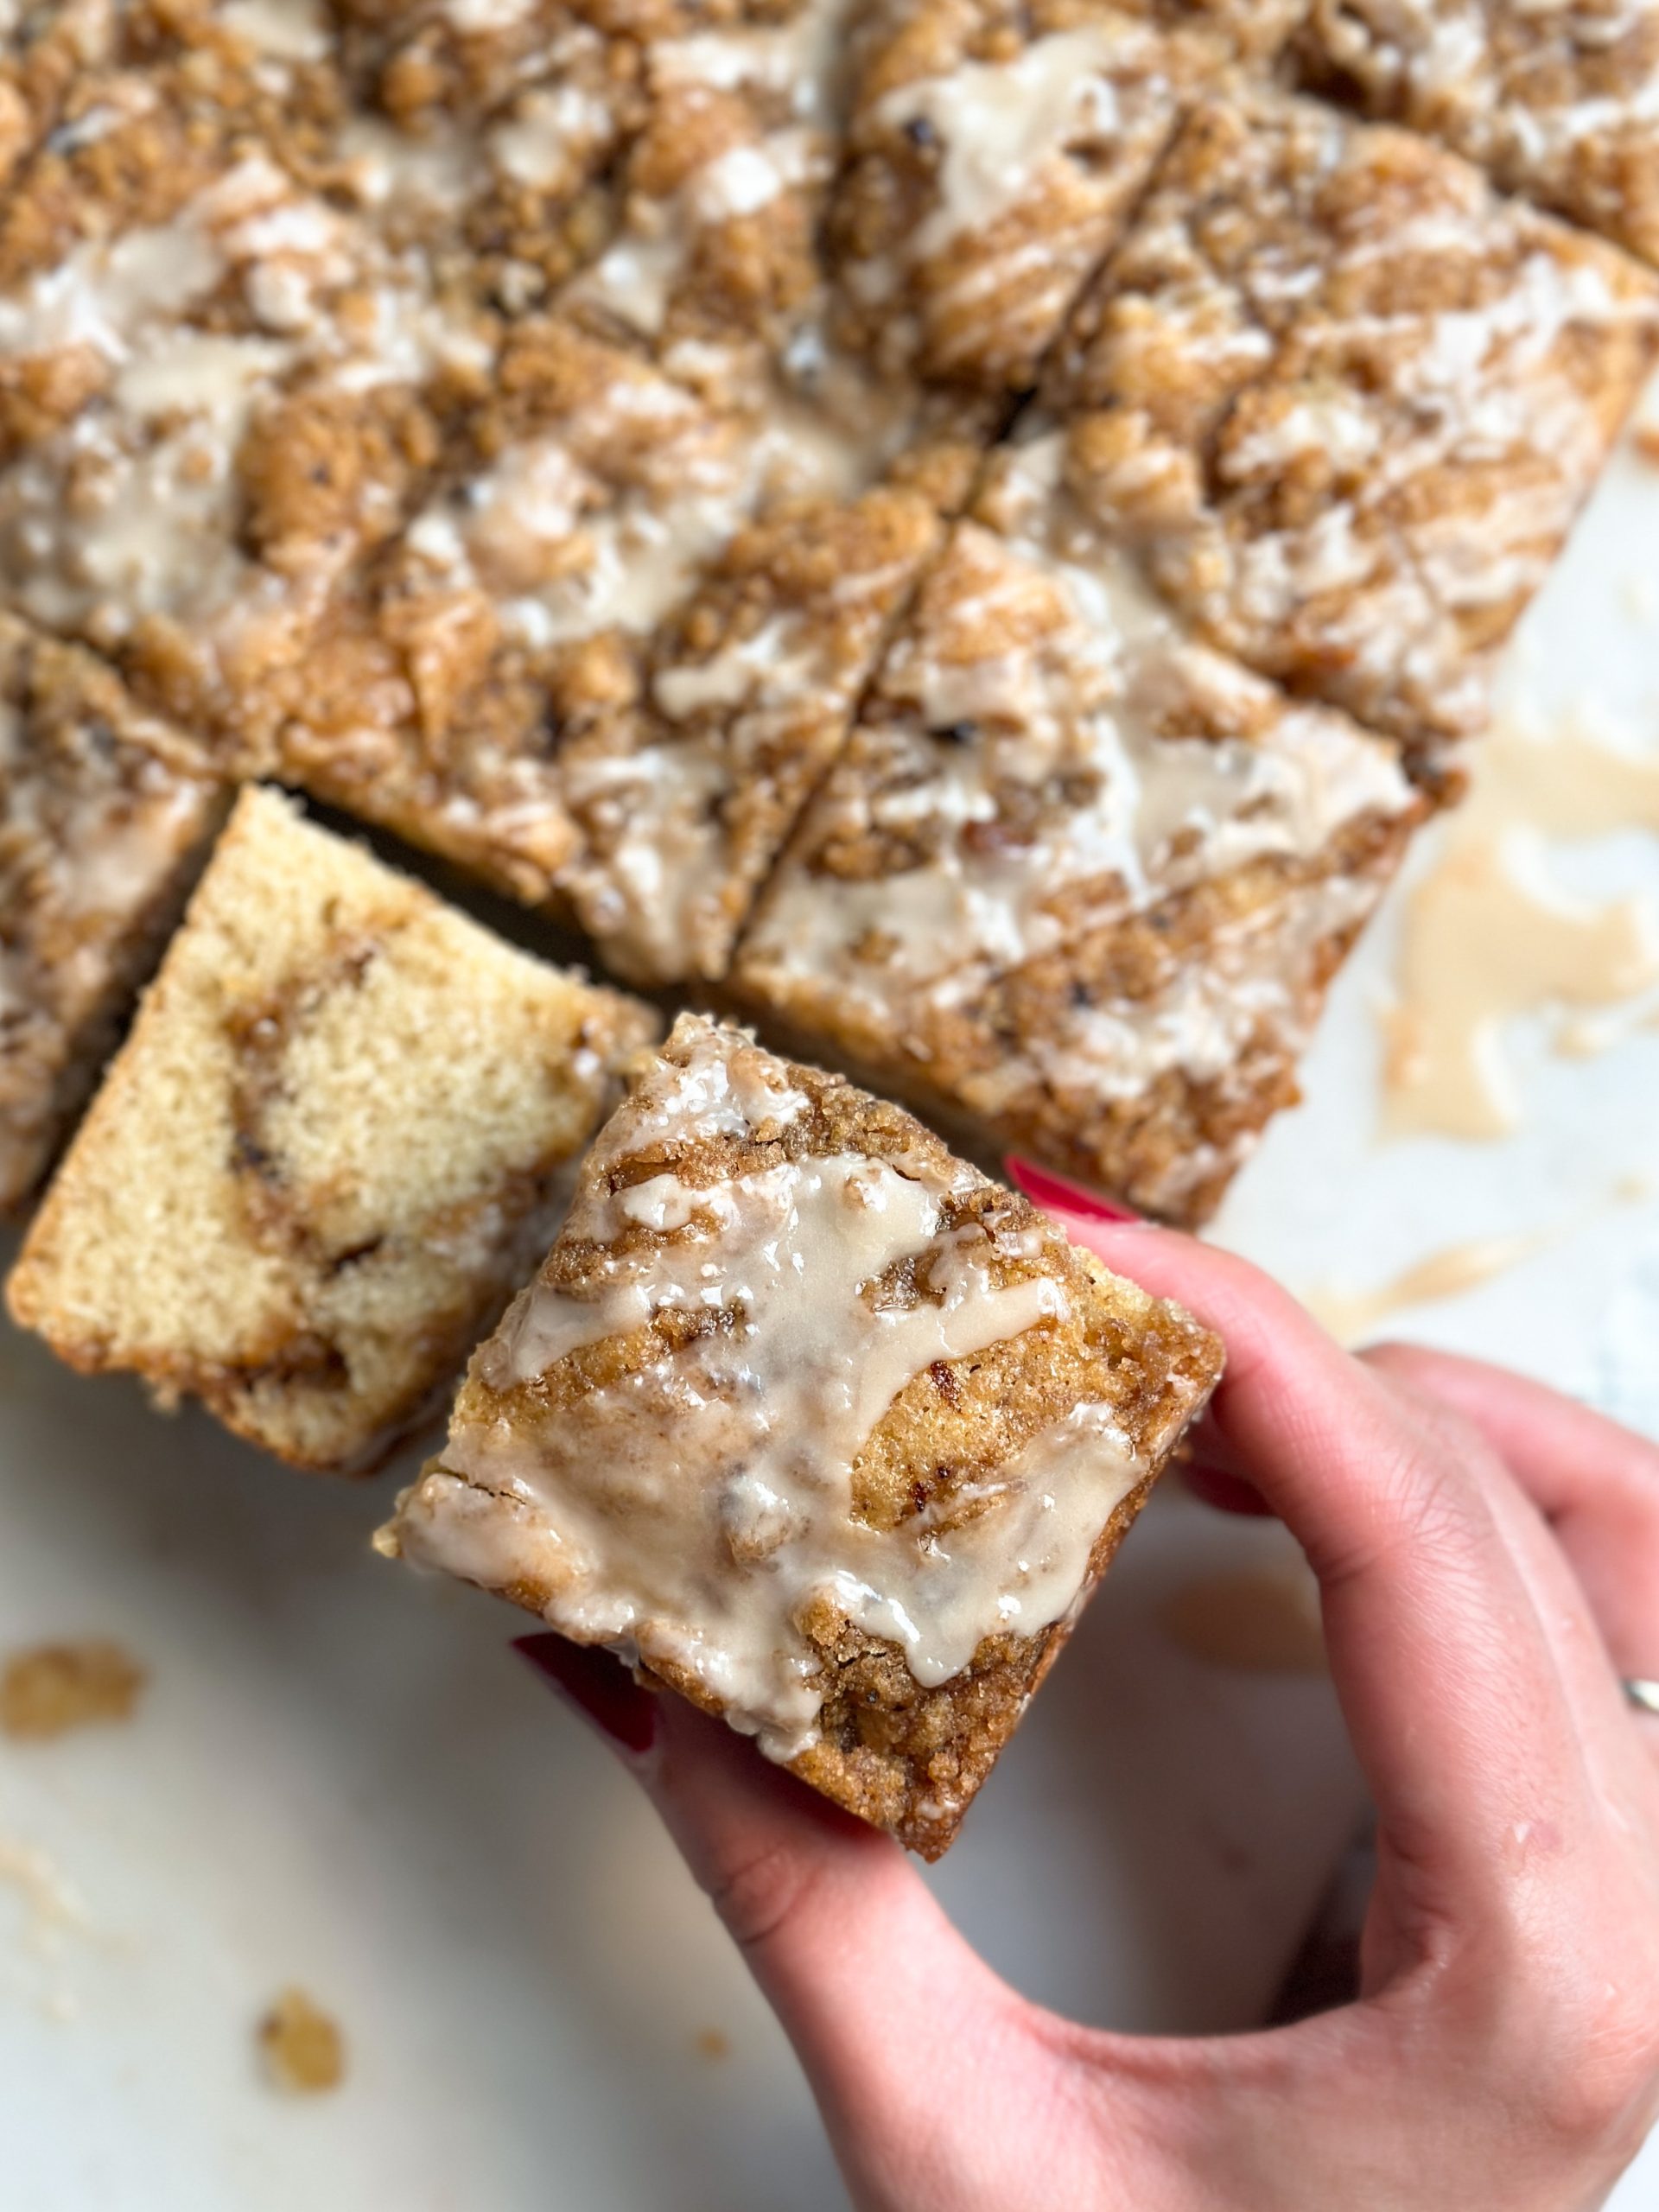 slices of Coffee cake with coffee streusel topping and coffee icing on a marble serving board, with one slice turned sideways to reveal moist and soft interior and more streusel inside; hand removing 1 slice